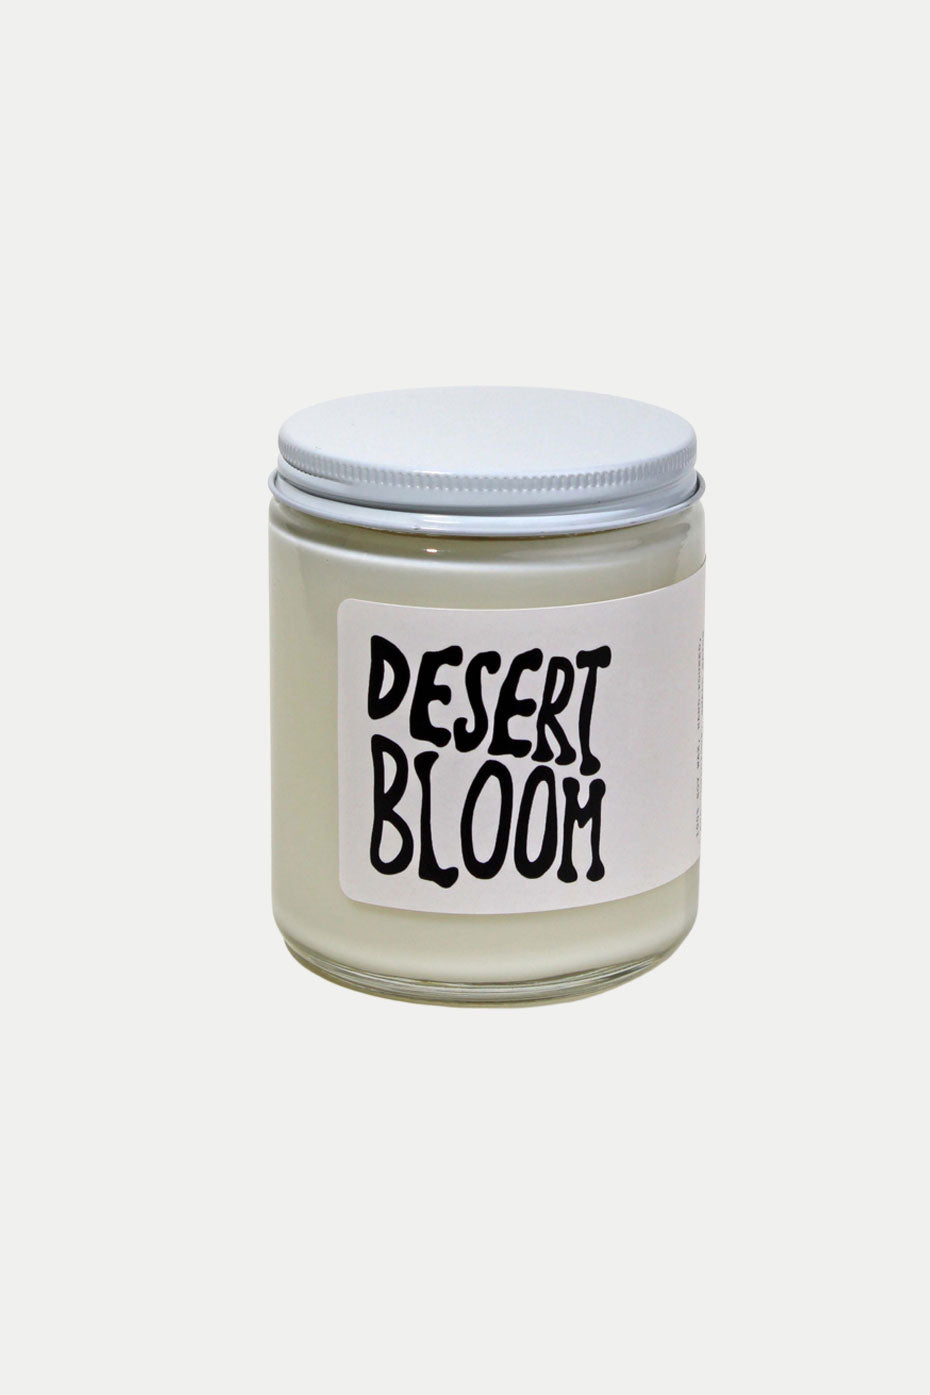 MOCO Candles Desert Bloom Soy Candle